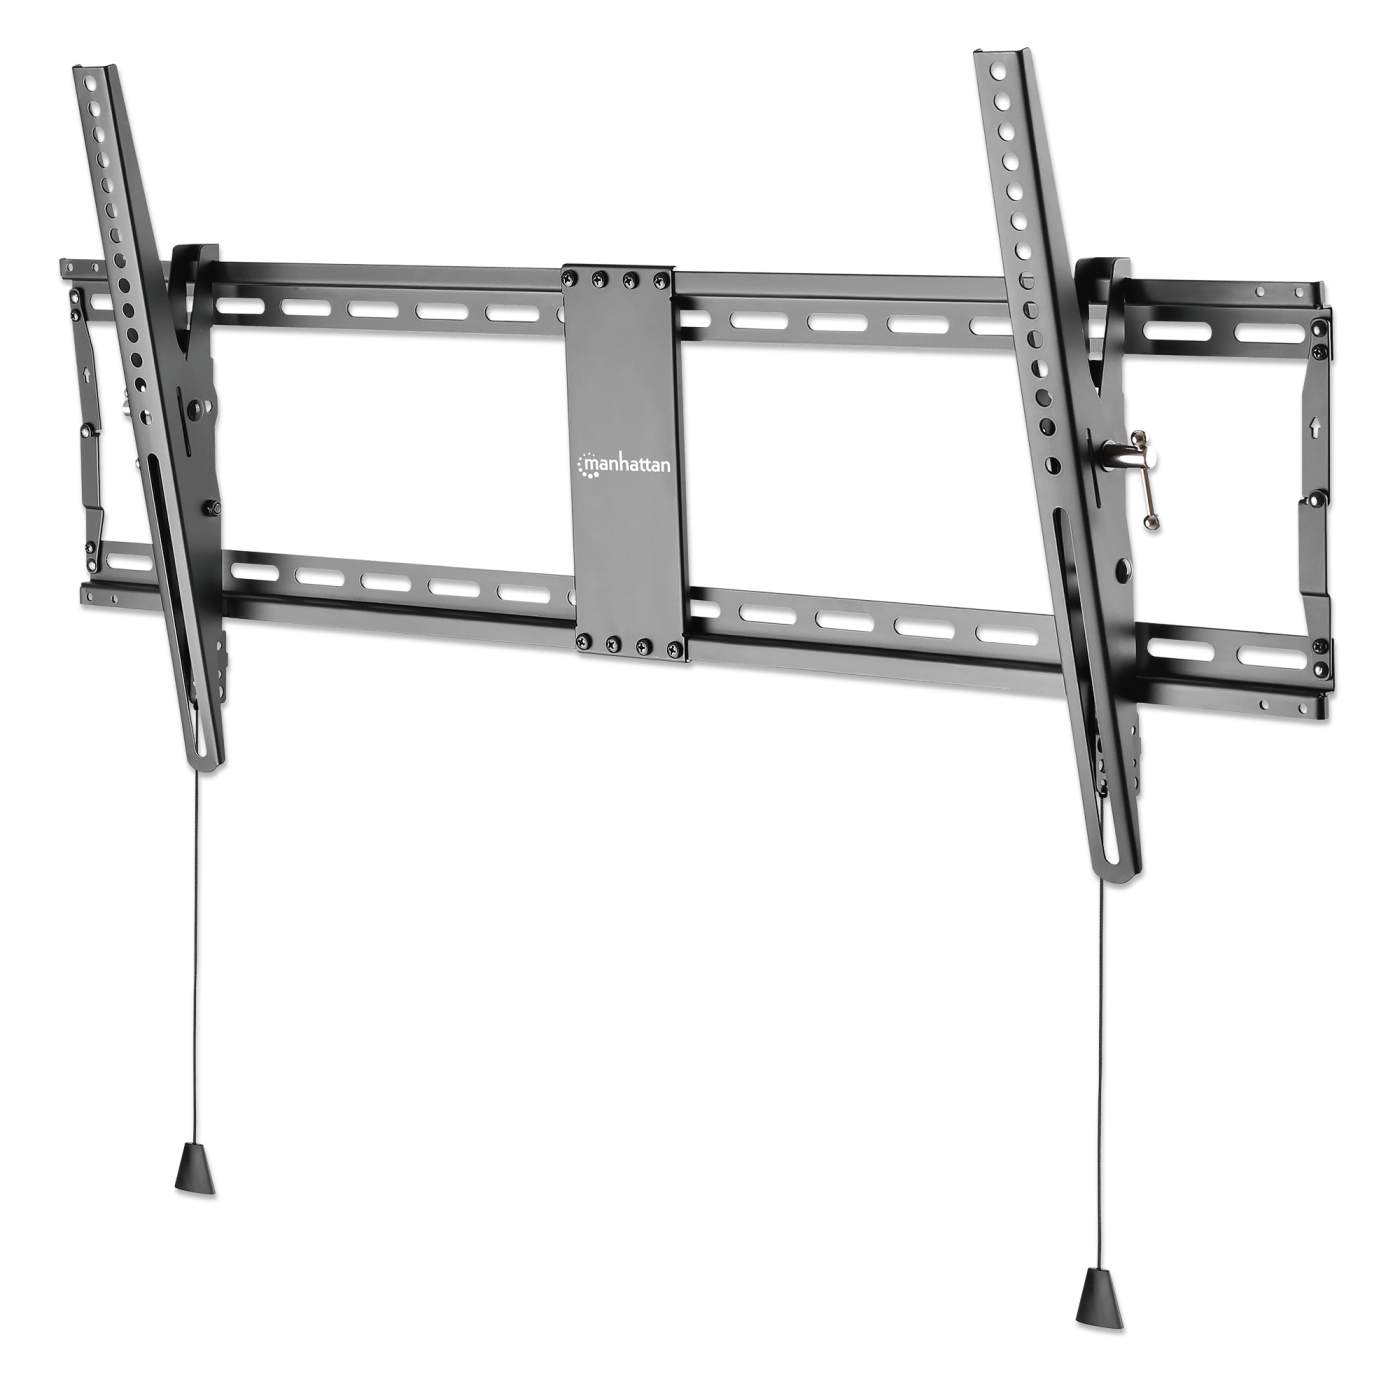 Low-Profile Tilting TV Wall Mount Image 5